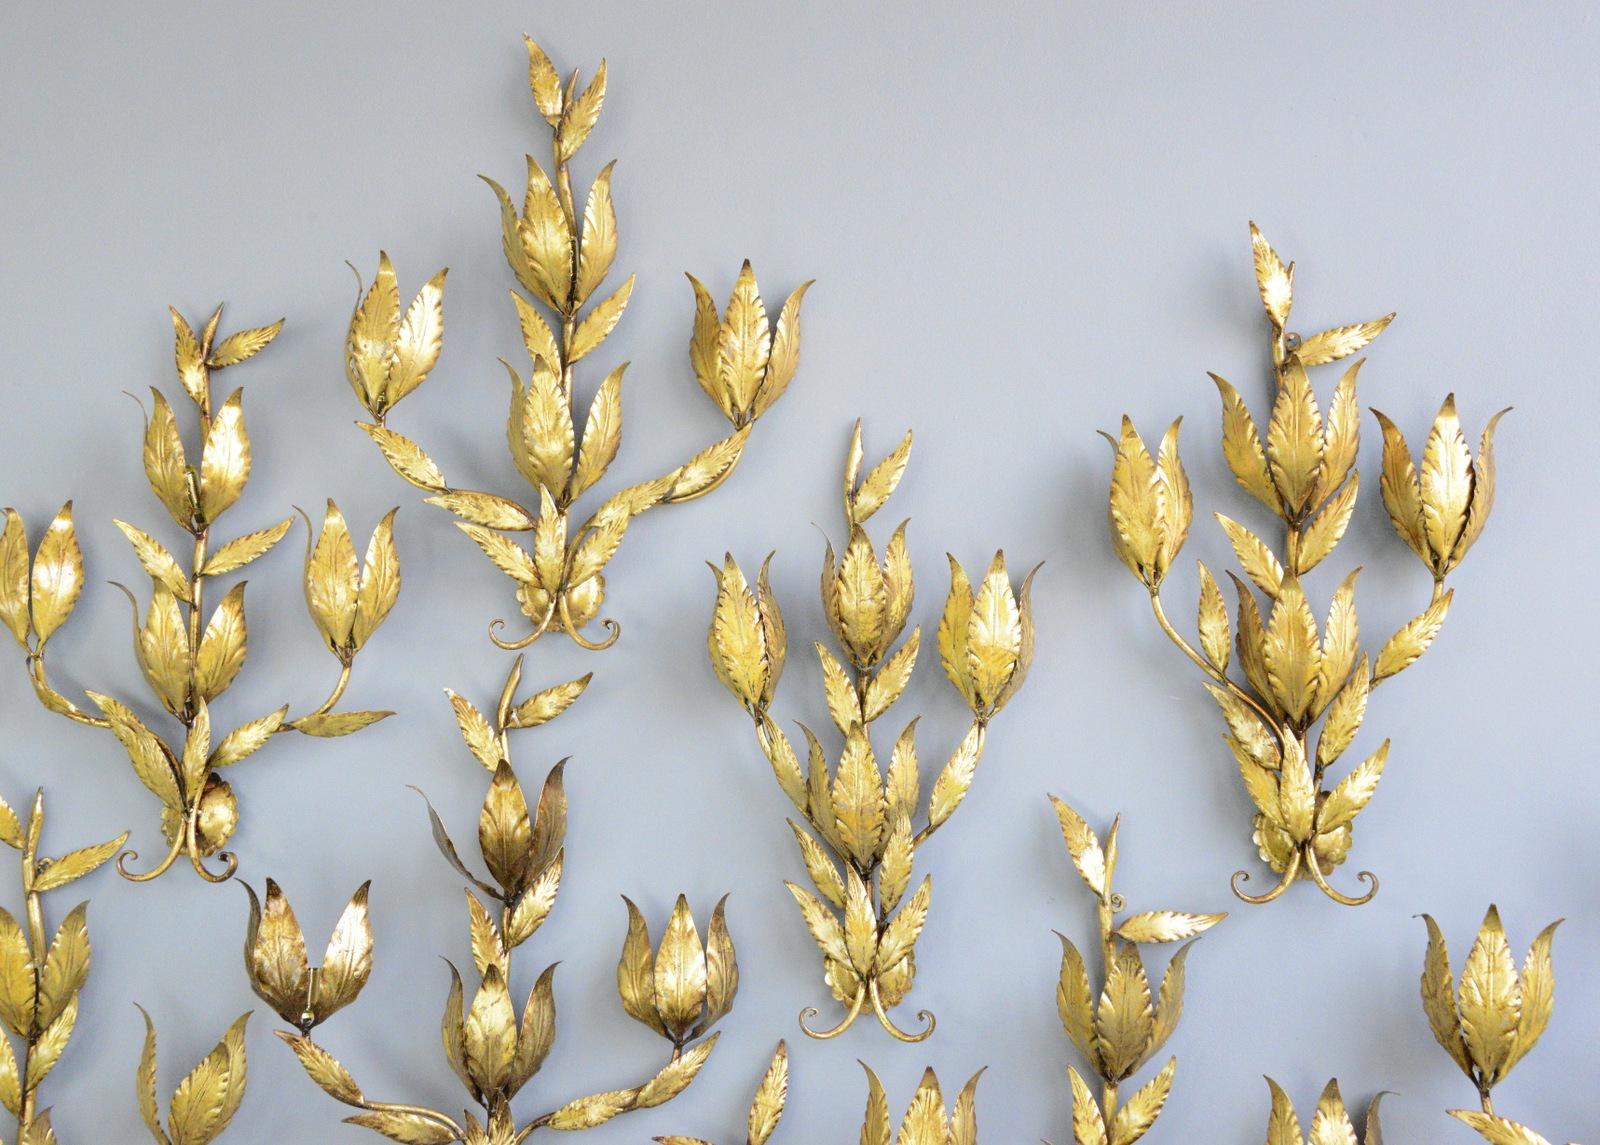 Gold leaf Hollywood Regency wall lights by Hans Kögl

- Price is per light (3 available)
- Solid brass with 24ct gold leaf finish
- Take 4x E14 screw fit bulbs
- Wires directly into the wall
- Salvaged from a Casino
- By Hans Kogl
- German ~ 1960s
-